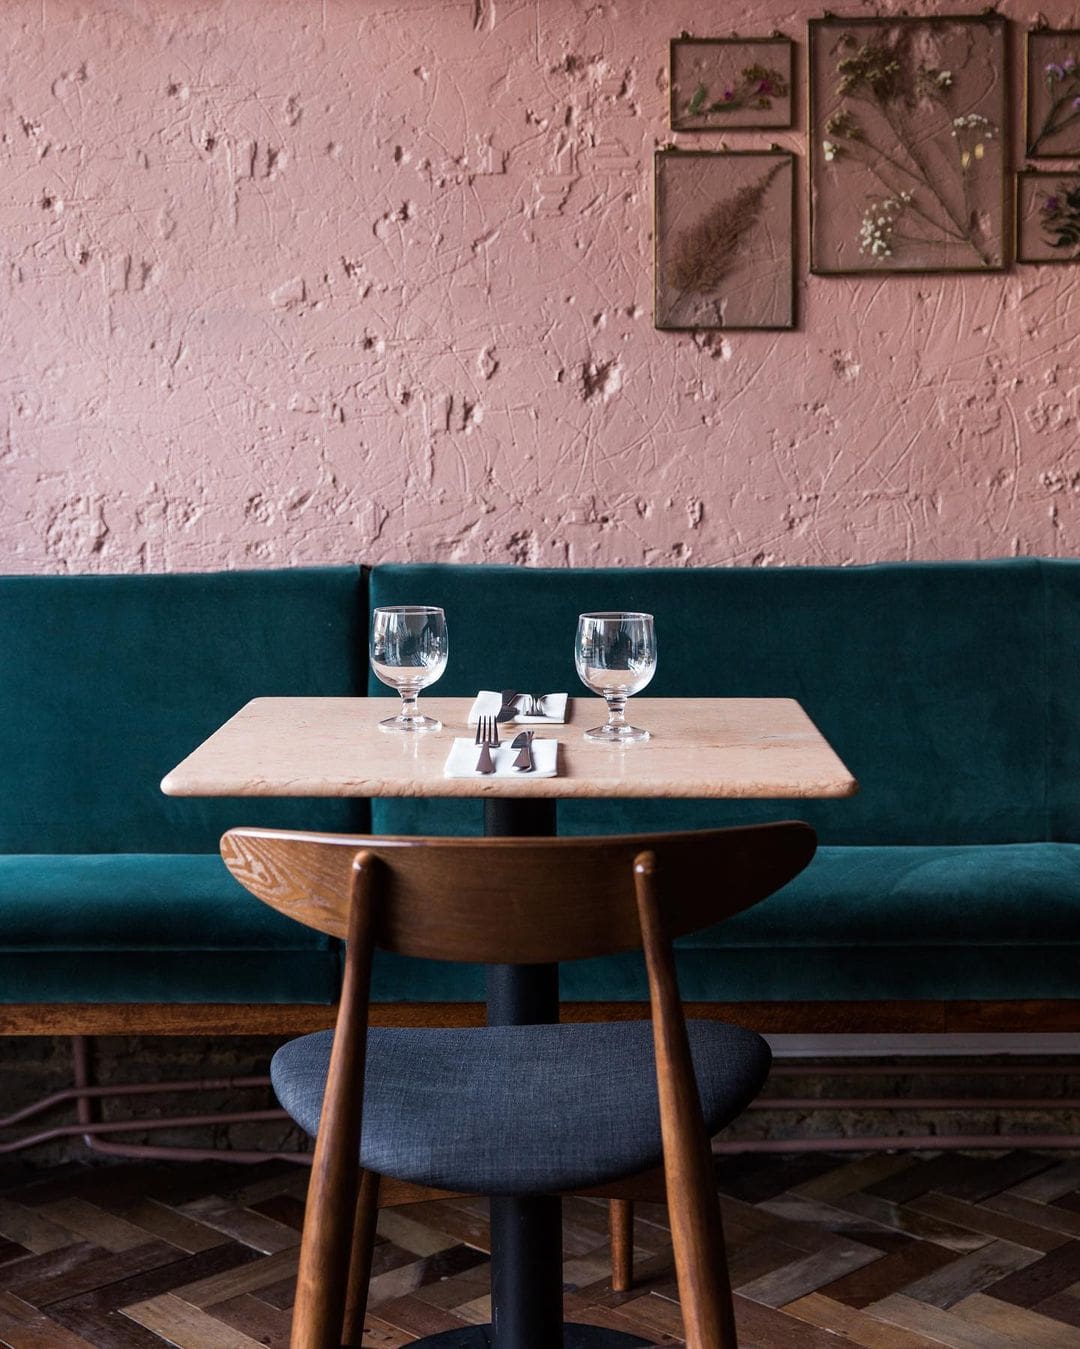 The best restaurants in Peckham | pink exposed brick walls and a velvet banquette interior at Kudu